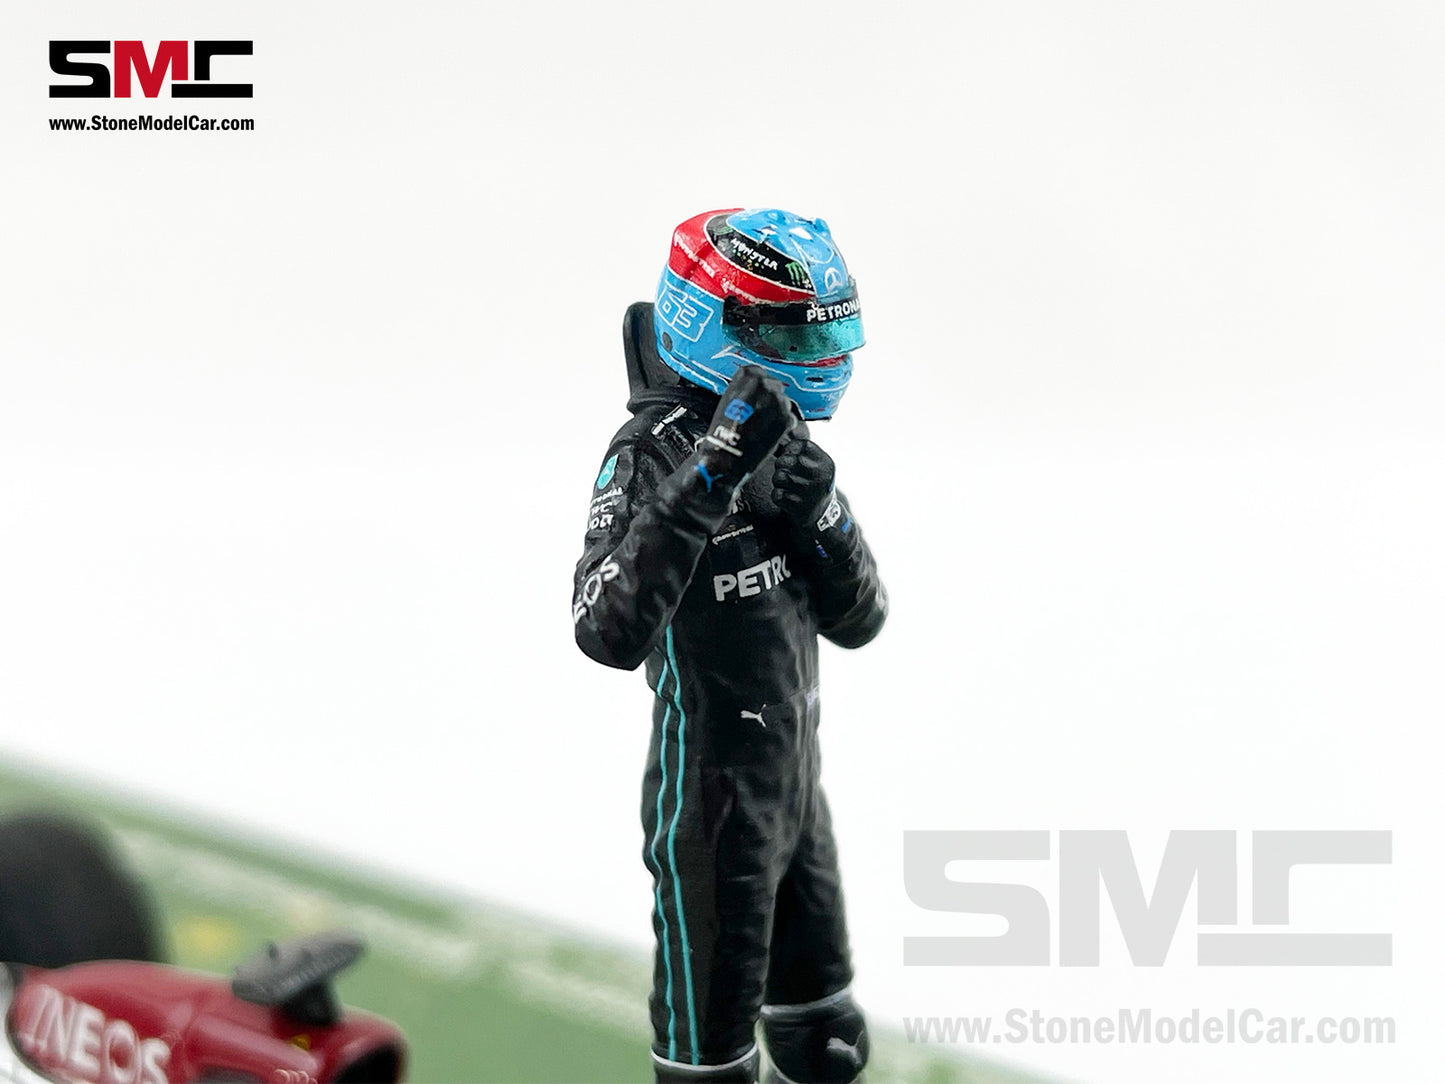 2022 F1 Mercedes W13 #63 George Russell Brazil GP 1st Win Spark 1:43 with Figure